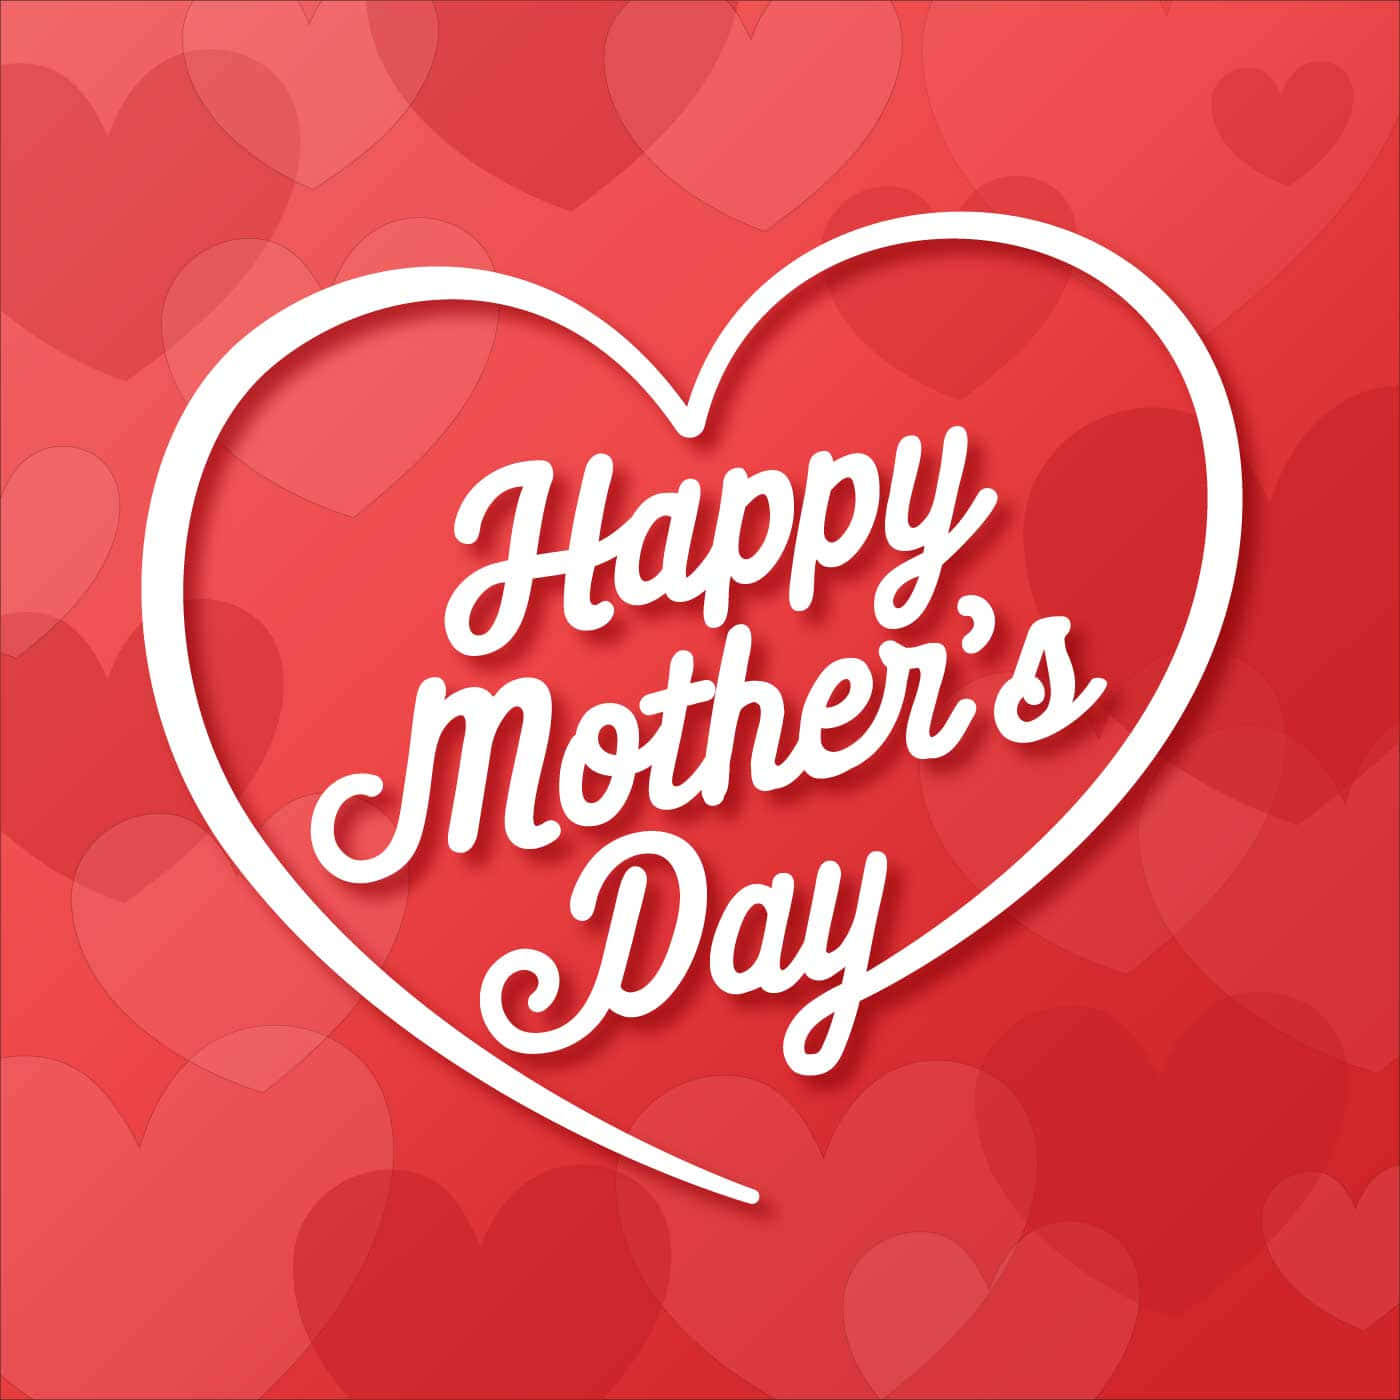 Happy Mothers Day to all the loving moms out there!